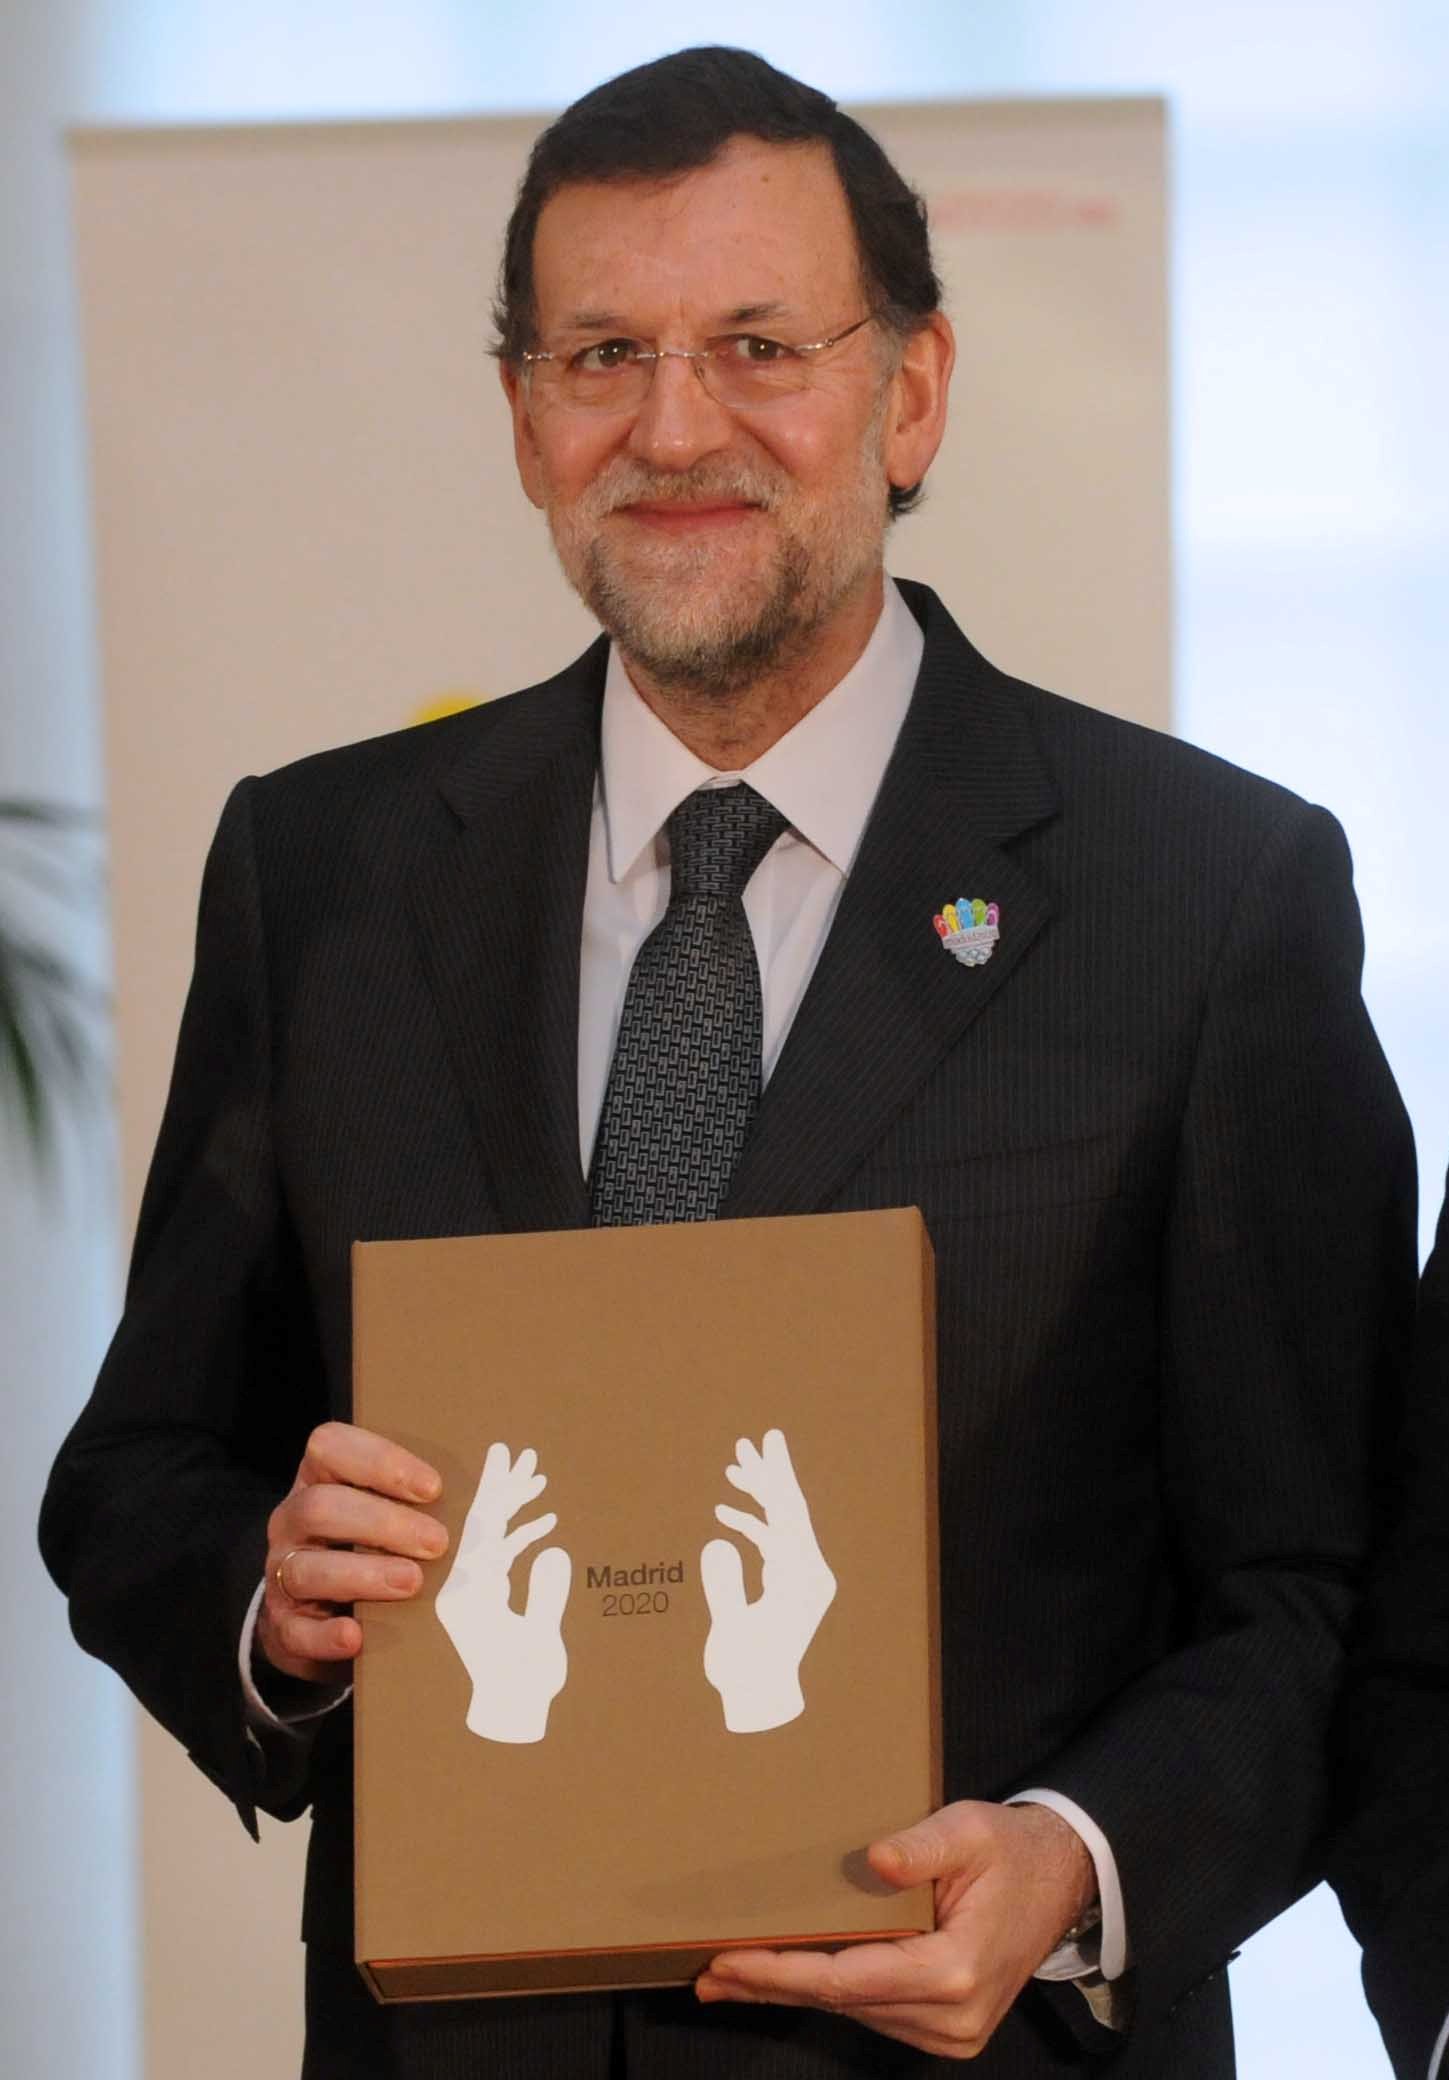 Madrid 2020 present candidature file to Mariano Rajoy